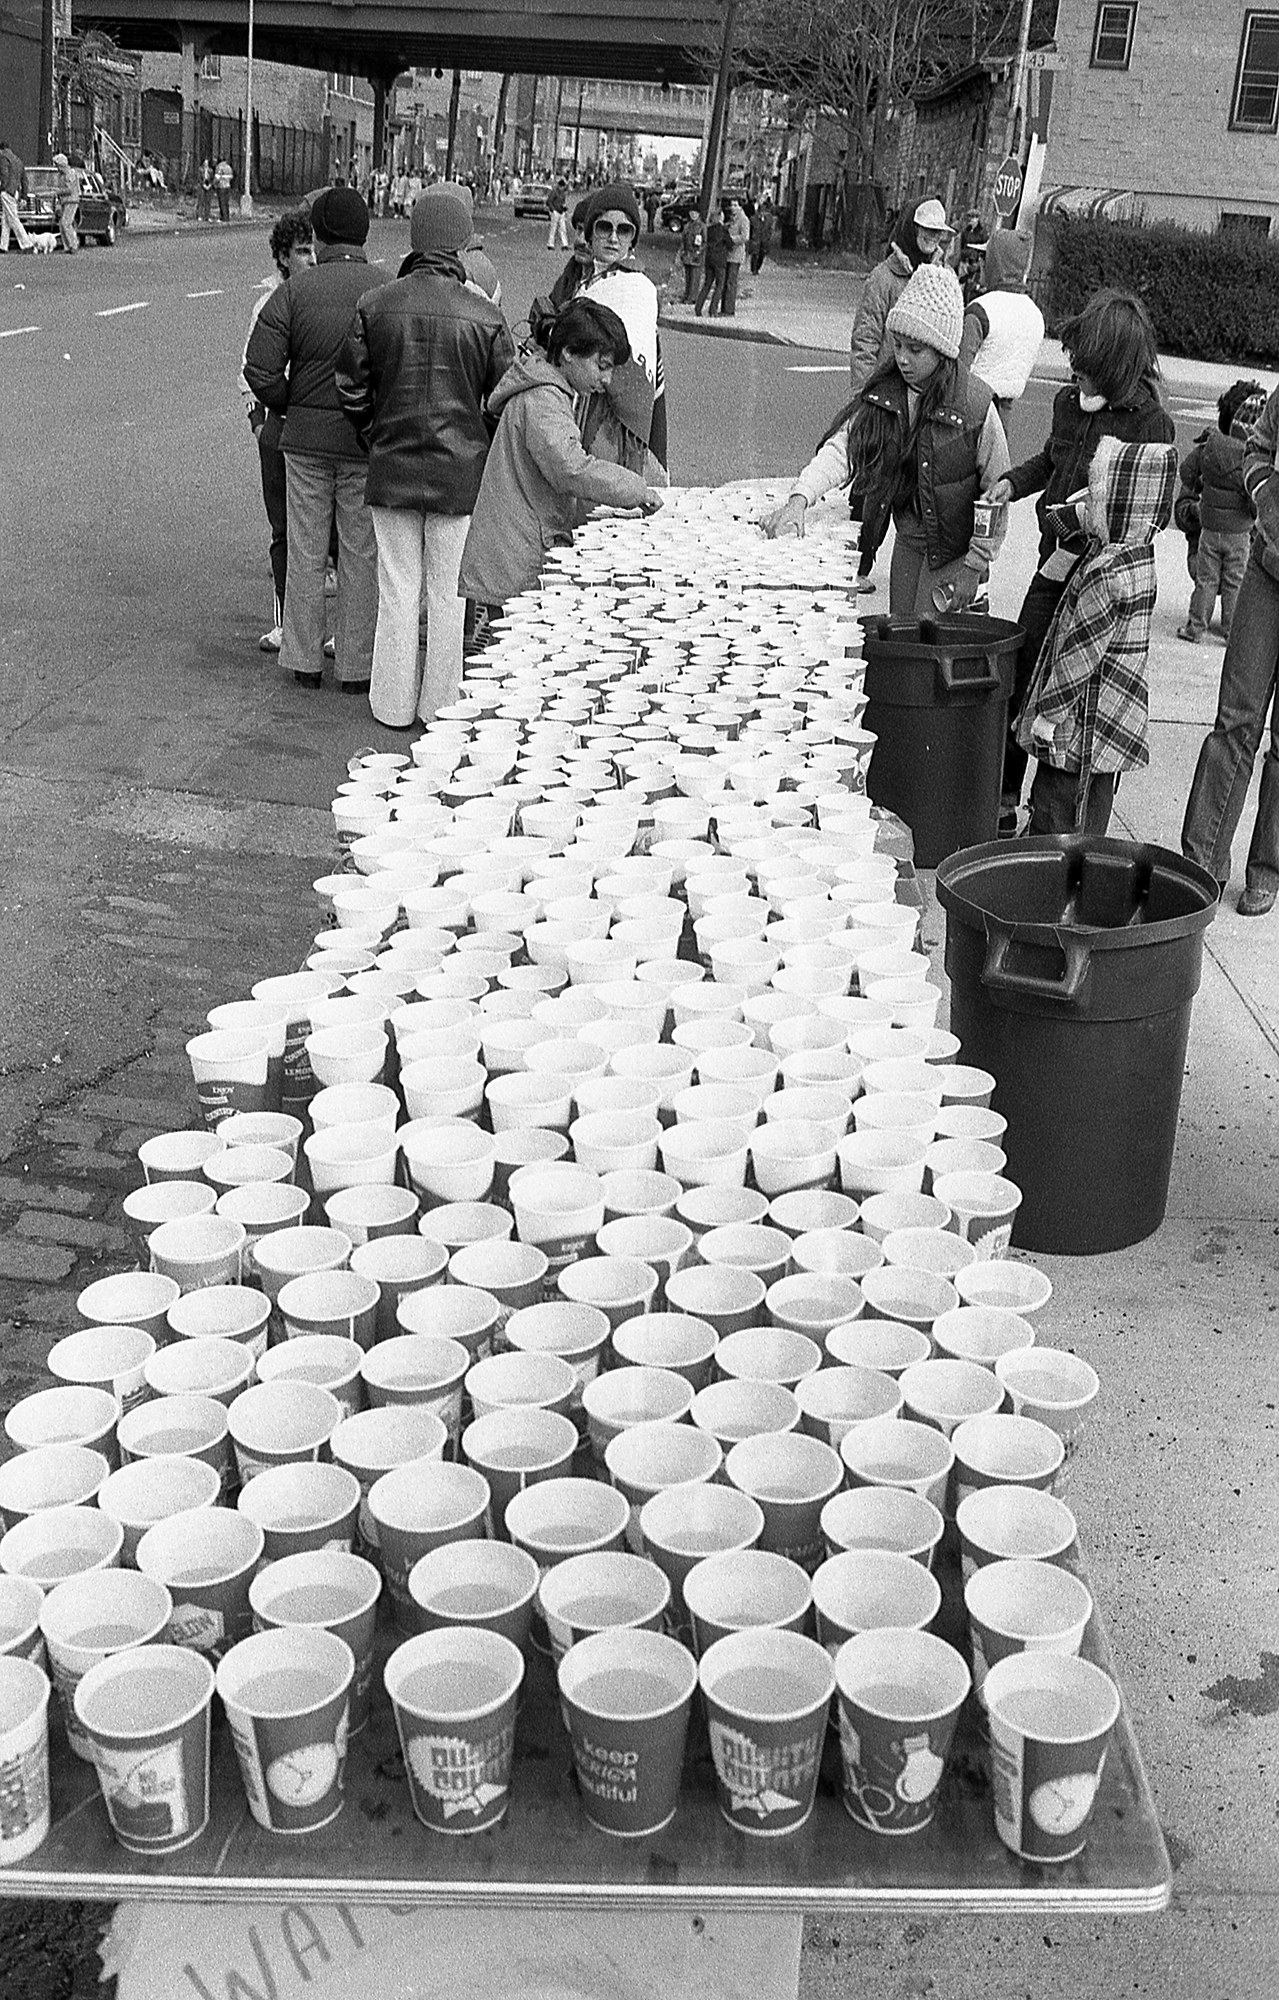 Hundreds of cups on a table in a black-and-white photo